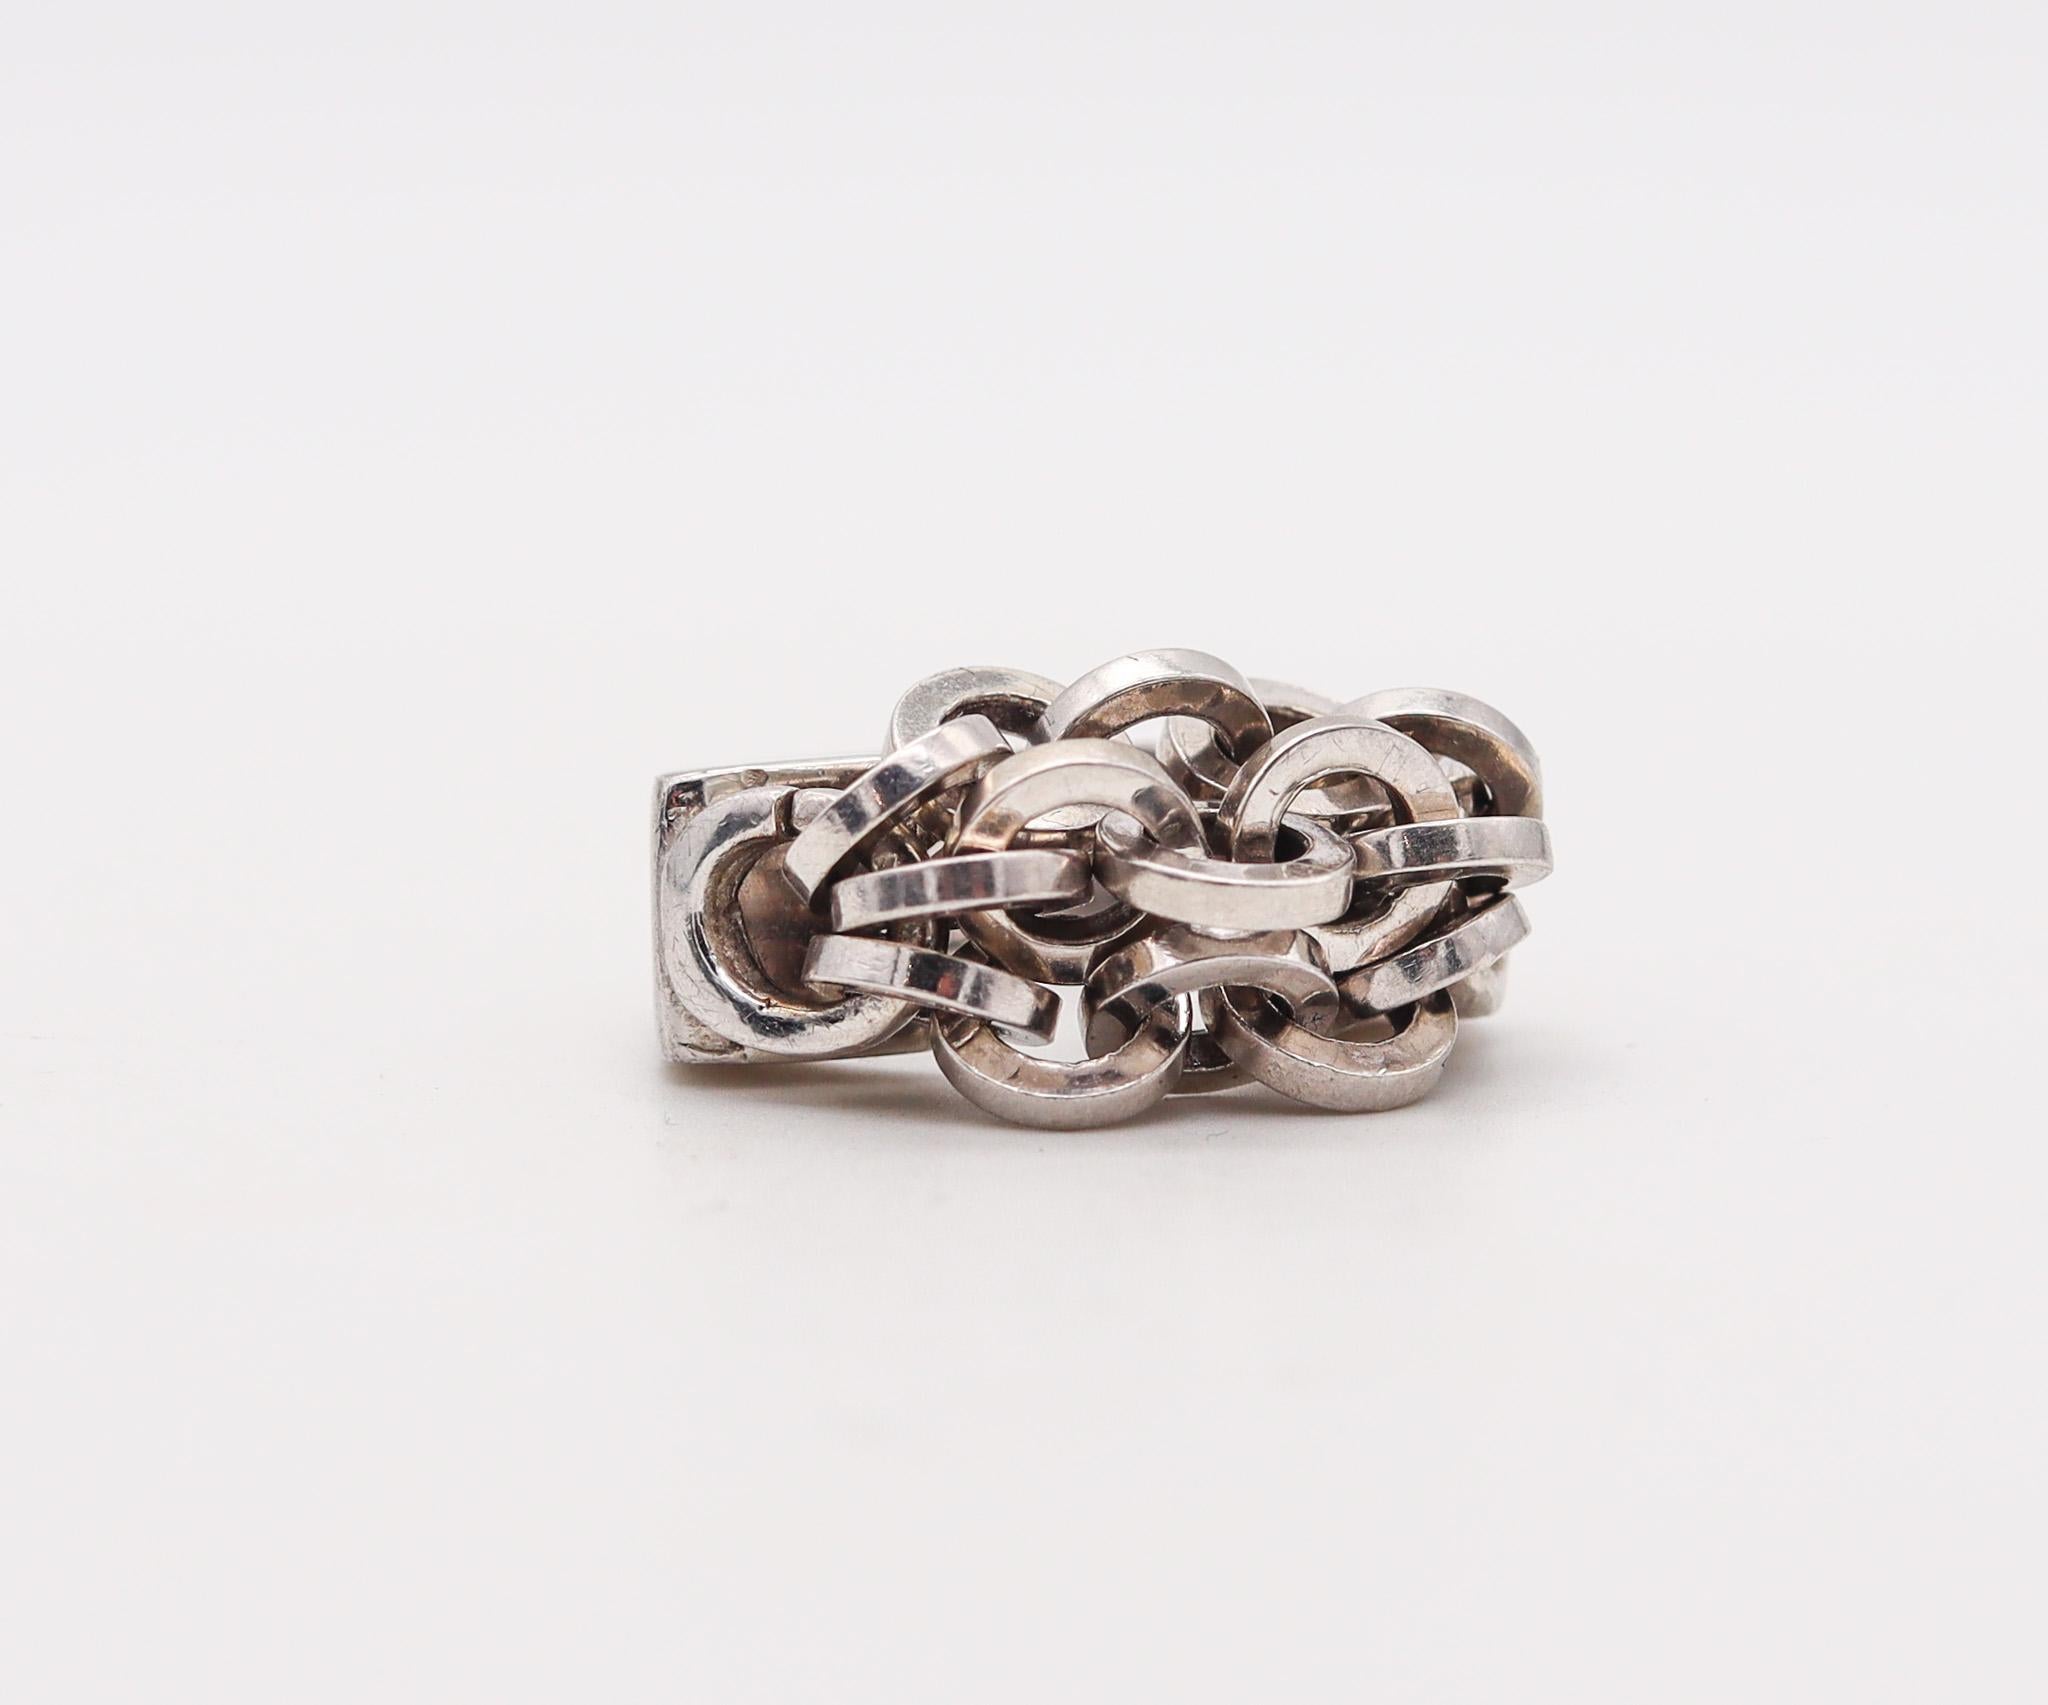 A sculptural ring designed by Franco Pianegonta.

An unusual modernist cocktail ring, created in Vicenza Italy by the jewelry house of Pianegonta. This ring has been crafted in solid .925/.999 sterling silver with high polished finish. The jewelry